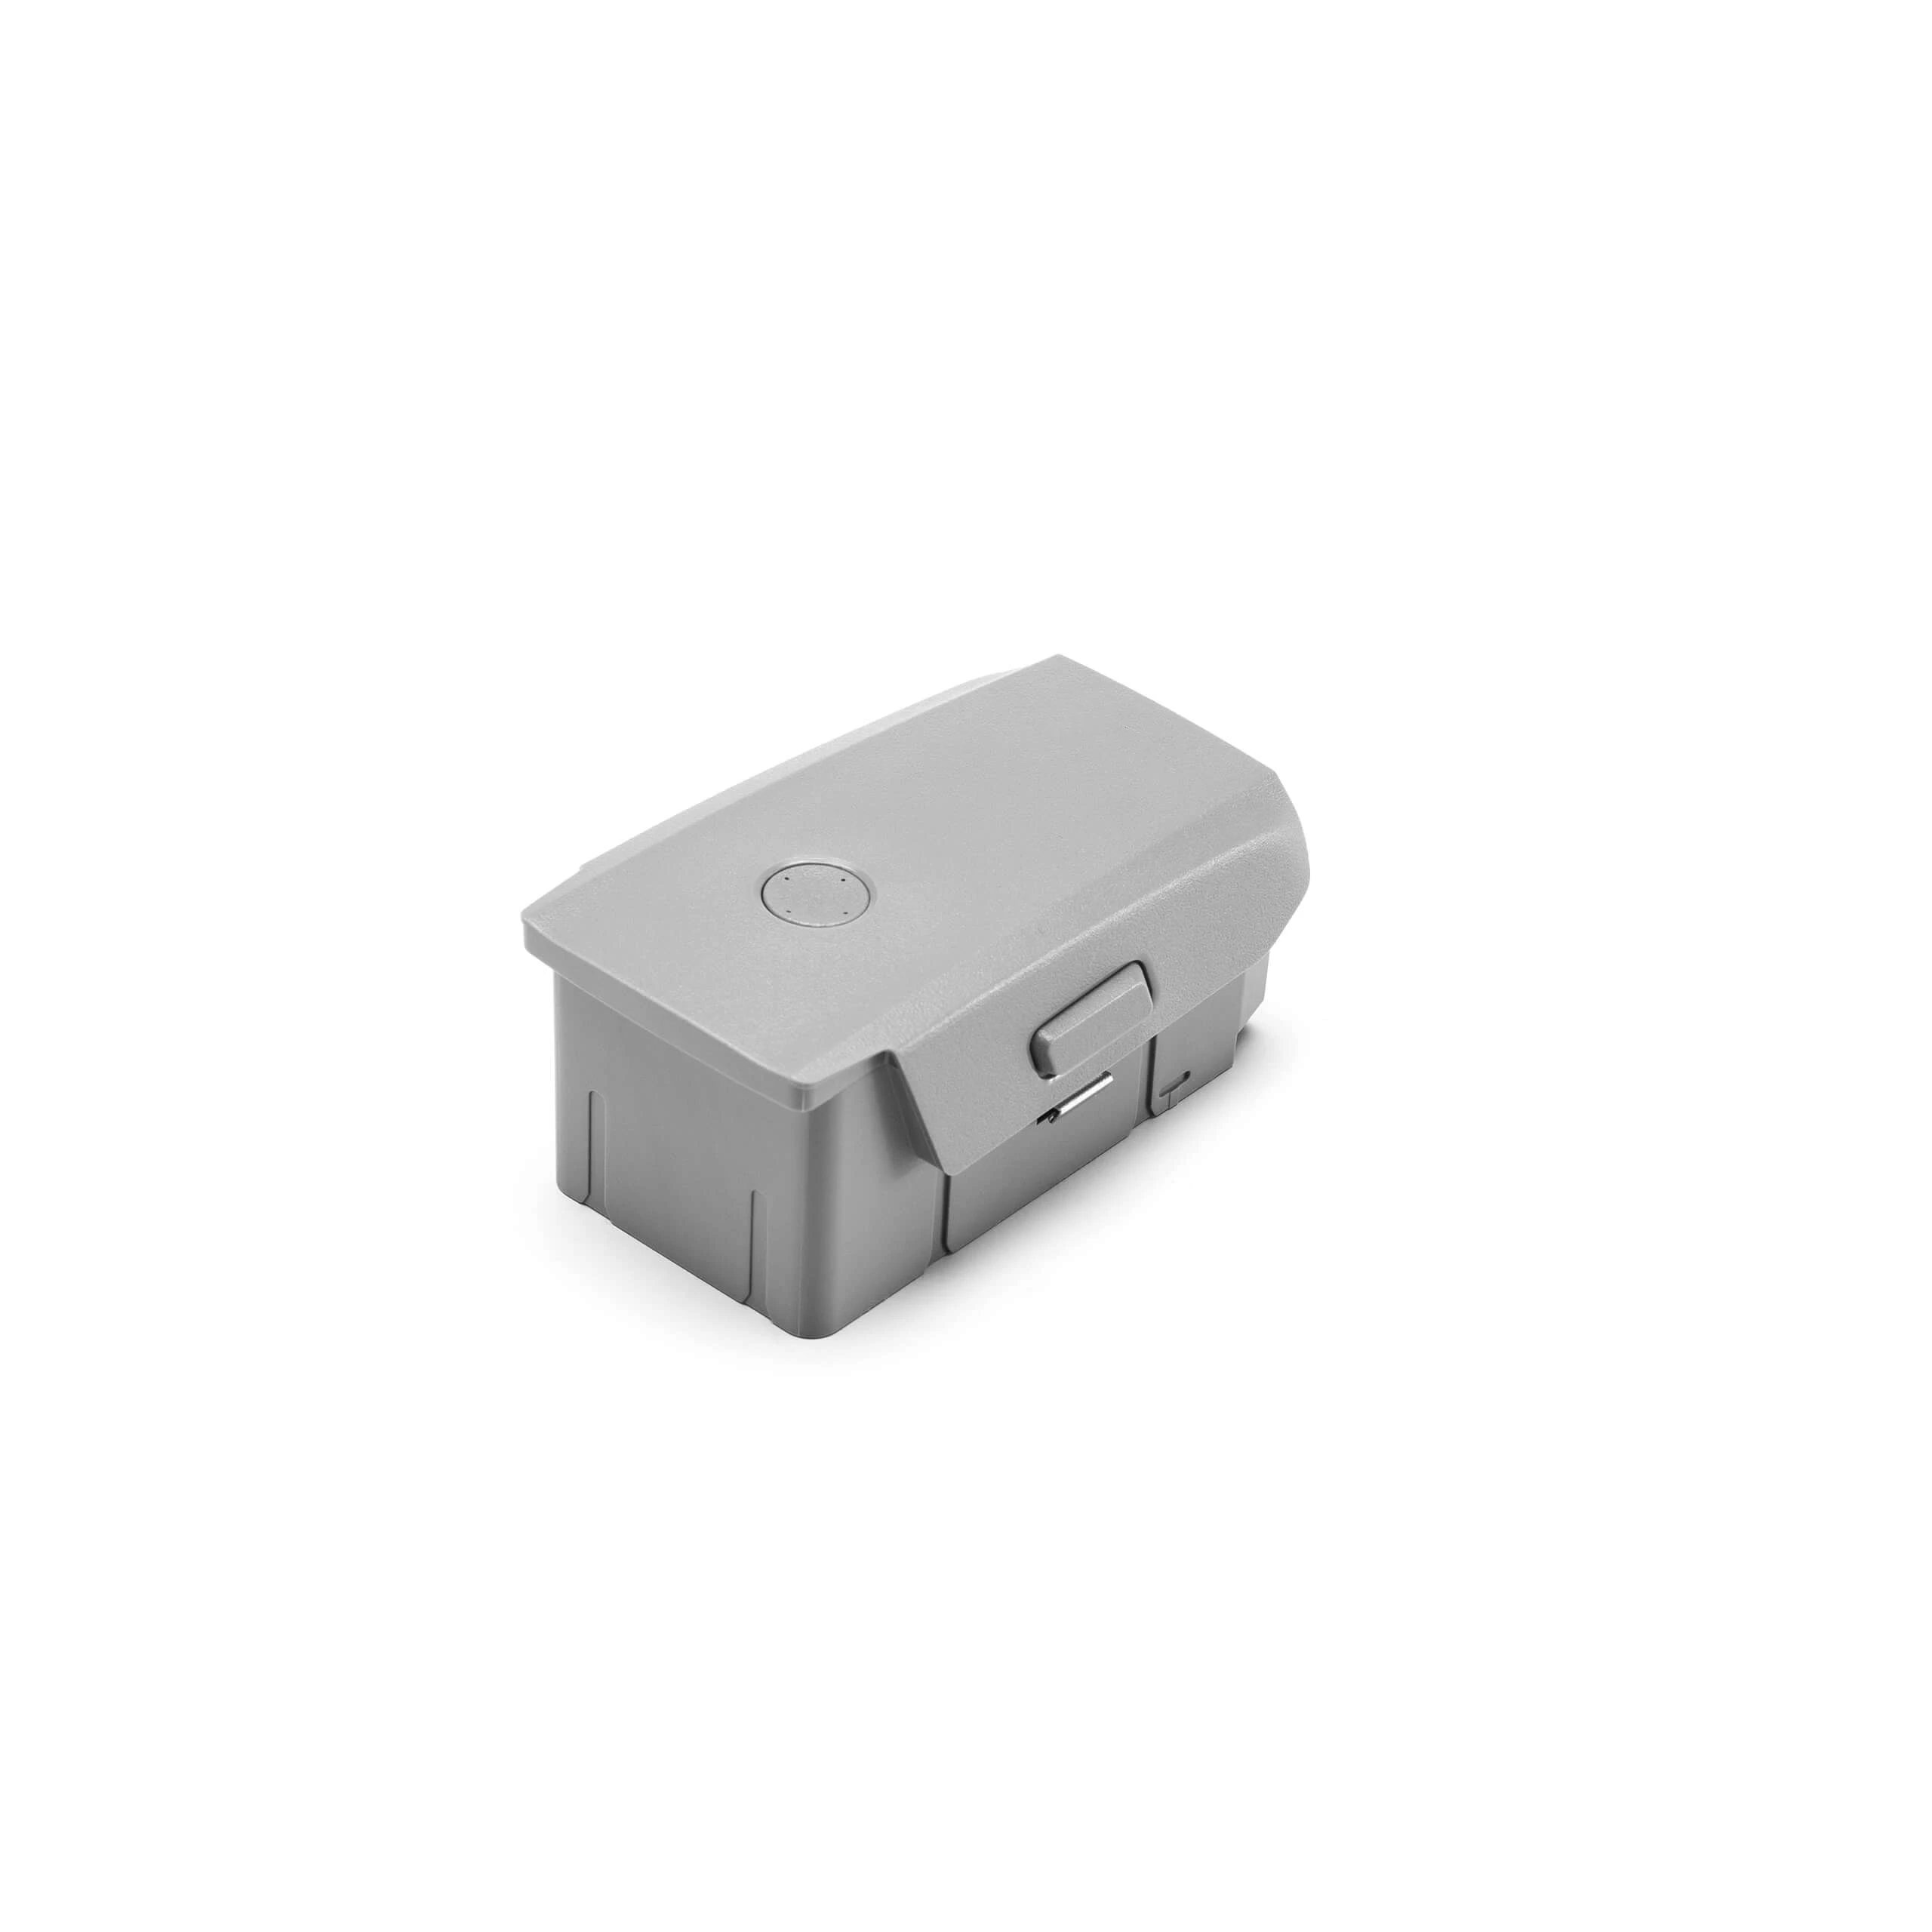 DJI Mavic Air2 Battery, built-in intelligent battery management system can monitor the battery capacity and cell status . it can